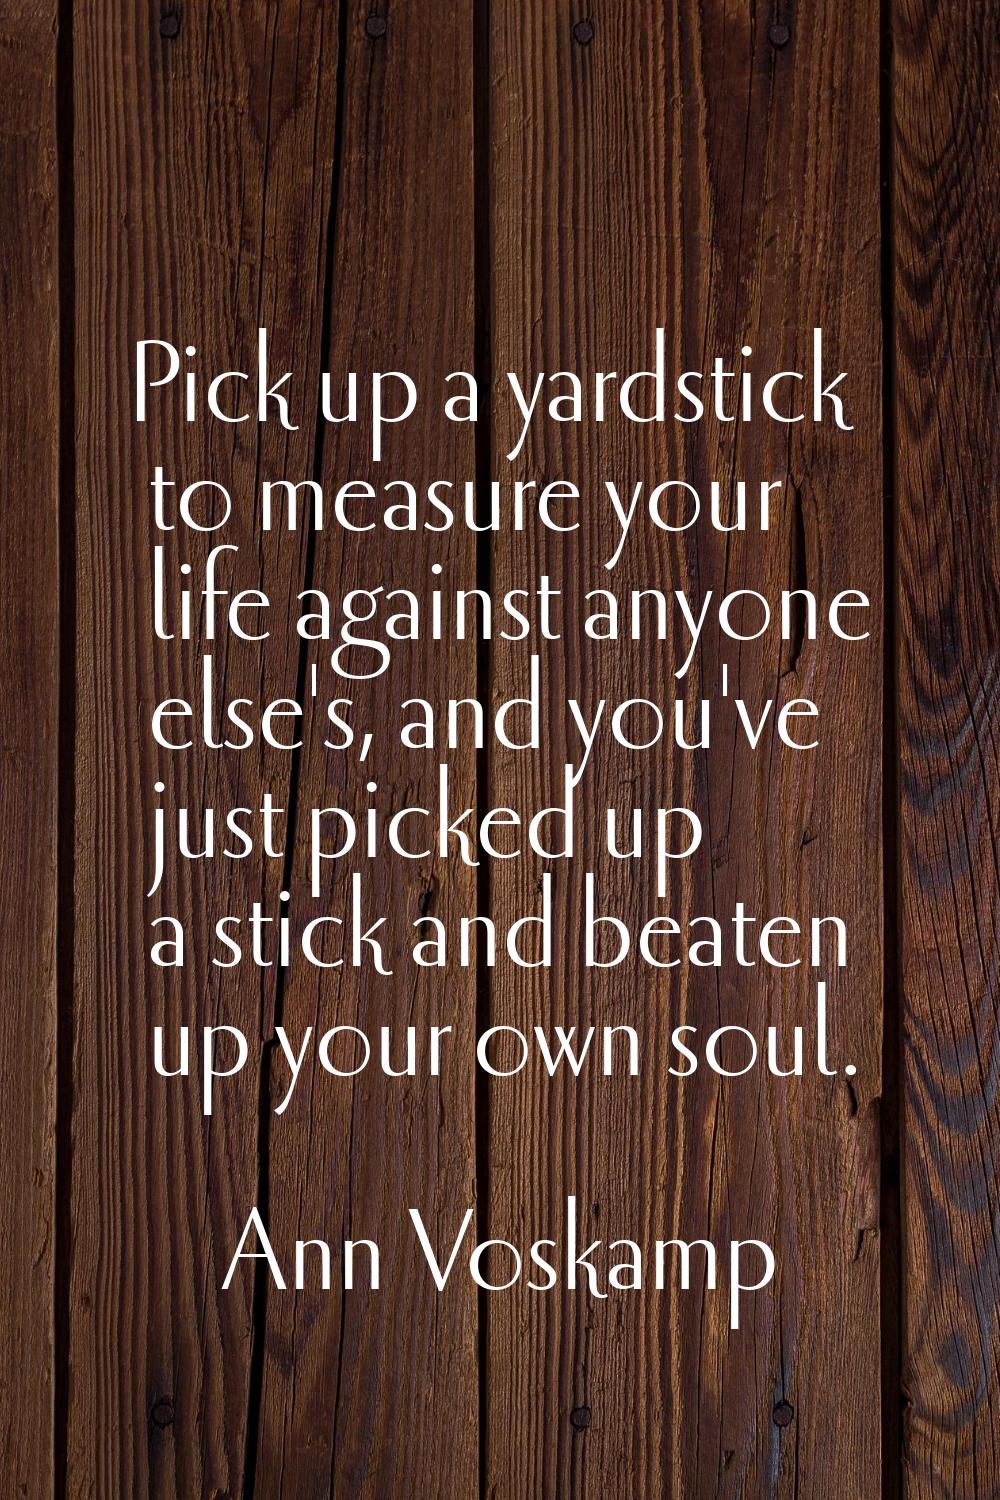 Pick up a yardstick to measure your life against anyone else's, and you've just picked up a stick a